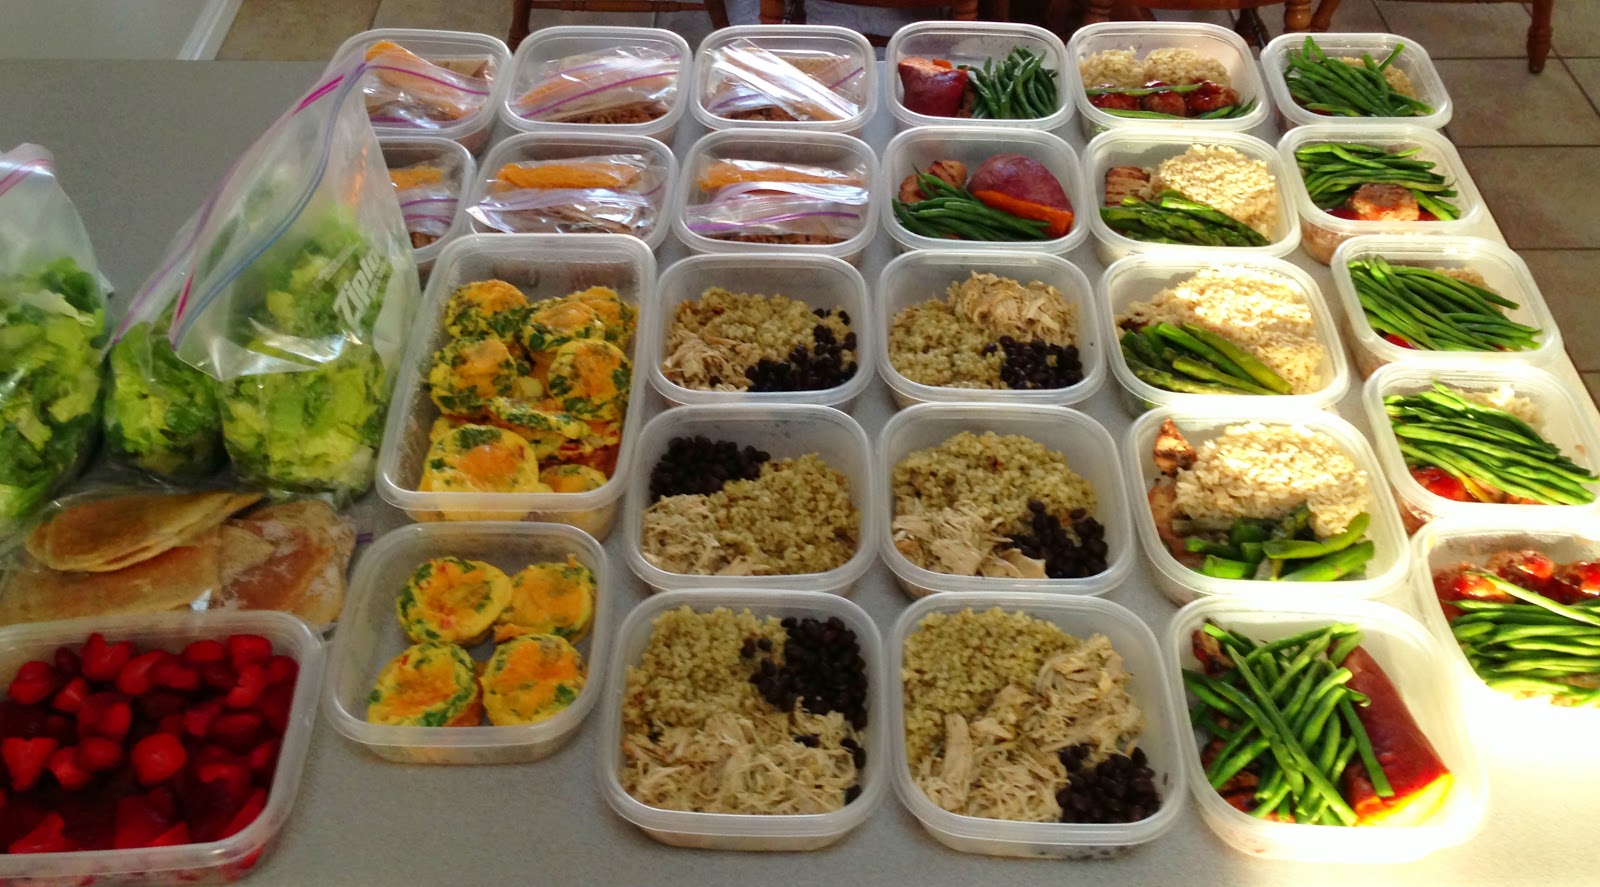 12 Brilliant Meal Prep Ideas to Free Up Your Time